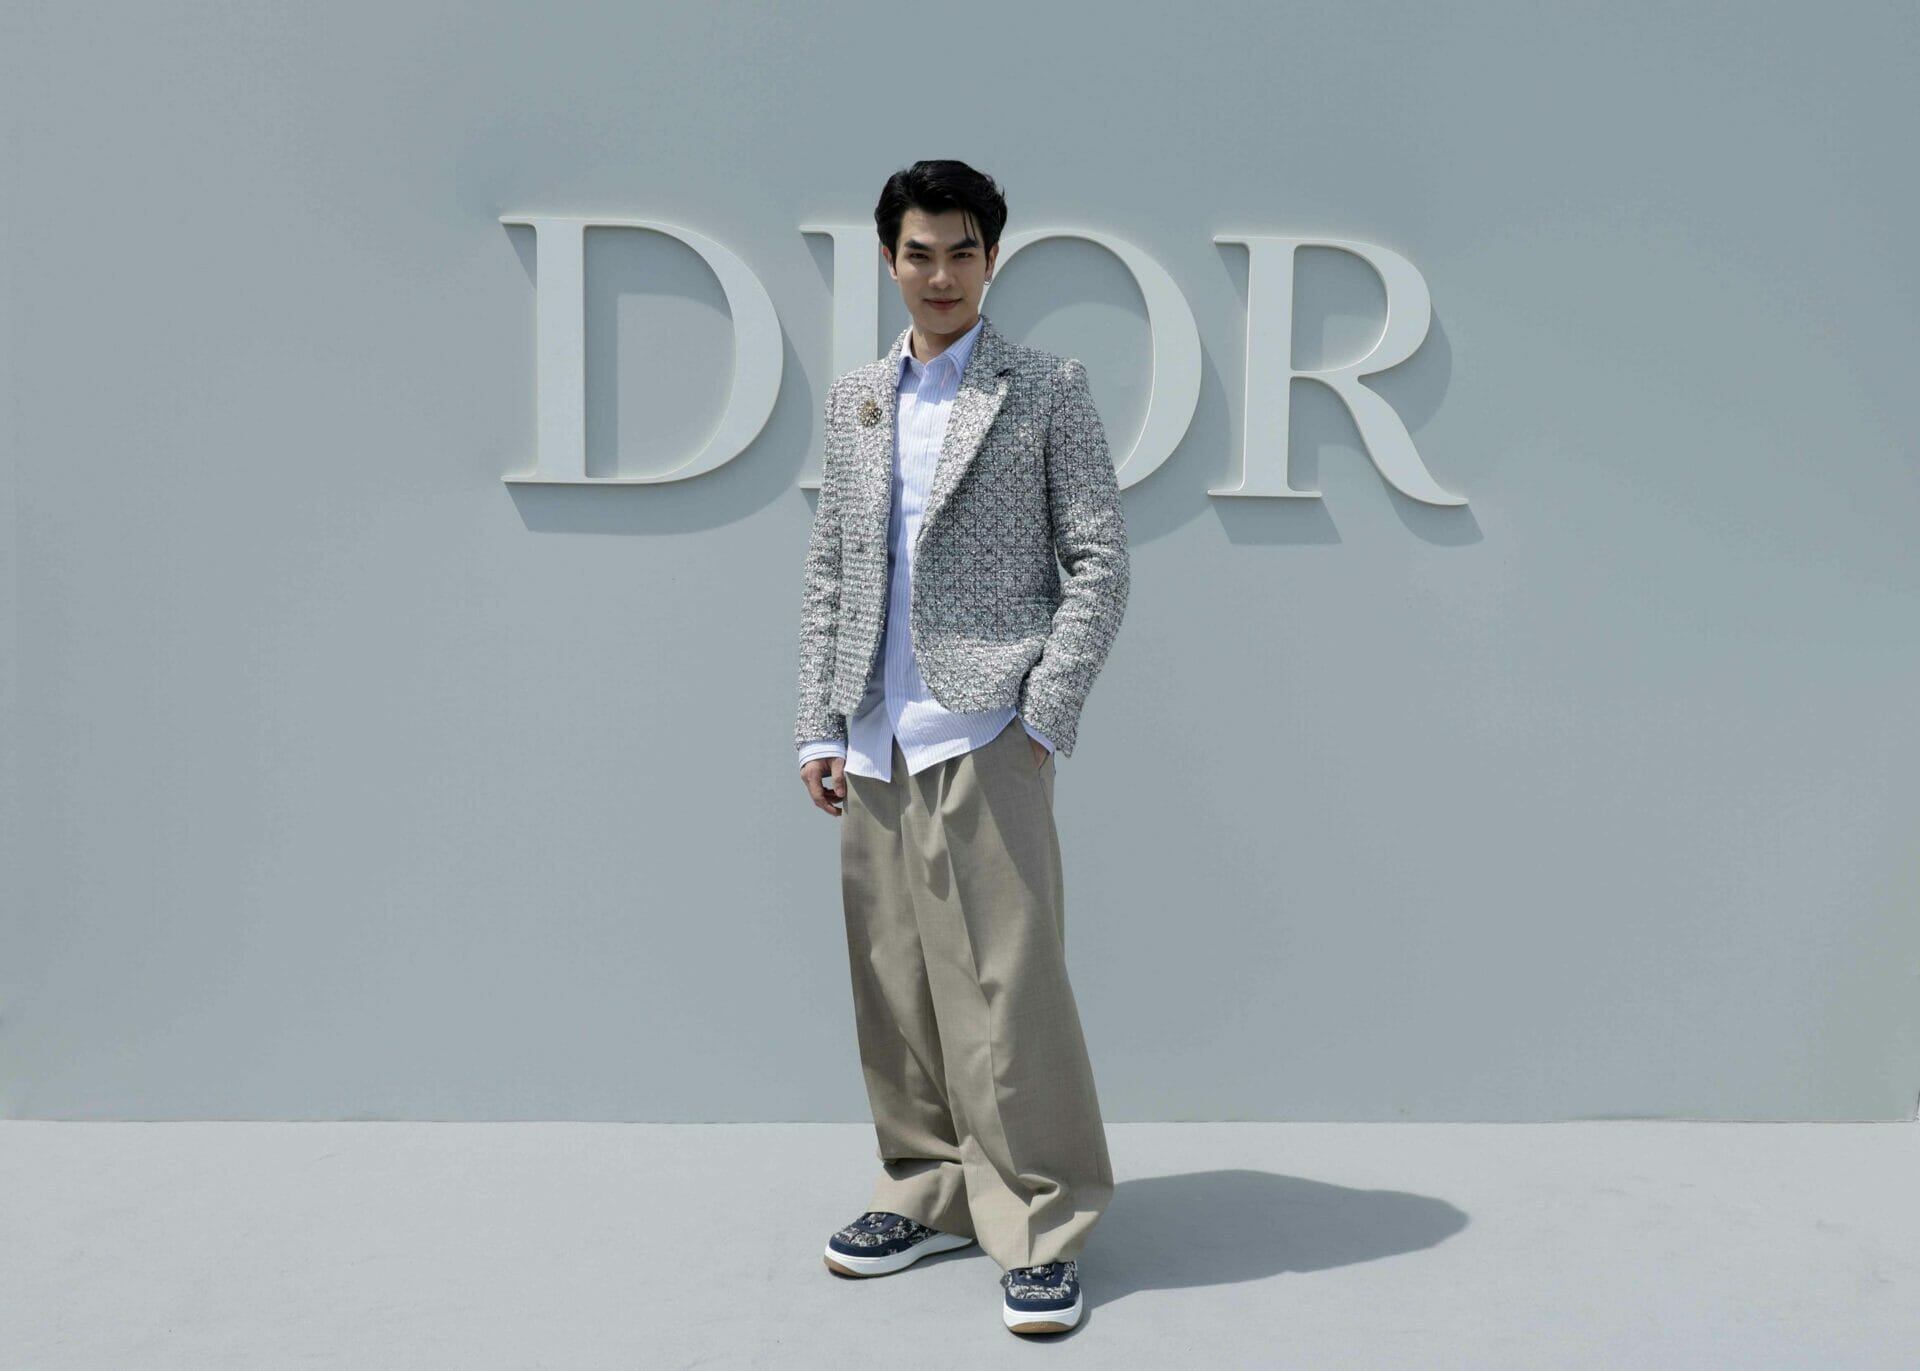 Mile Phakphum - Everything you need to know about the Dior Men's Spring/Summer 2023 Show.